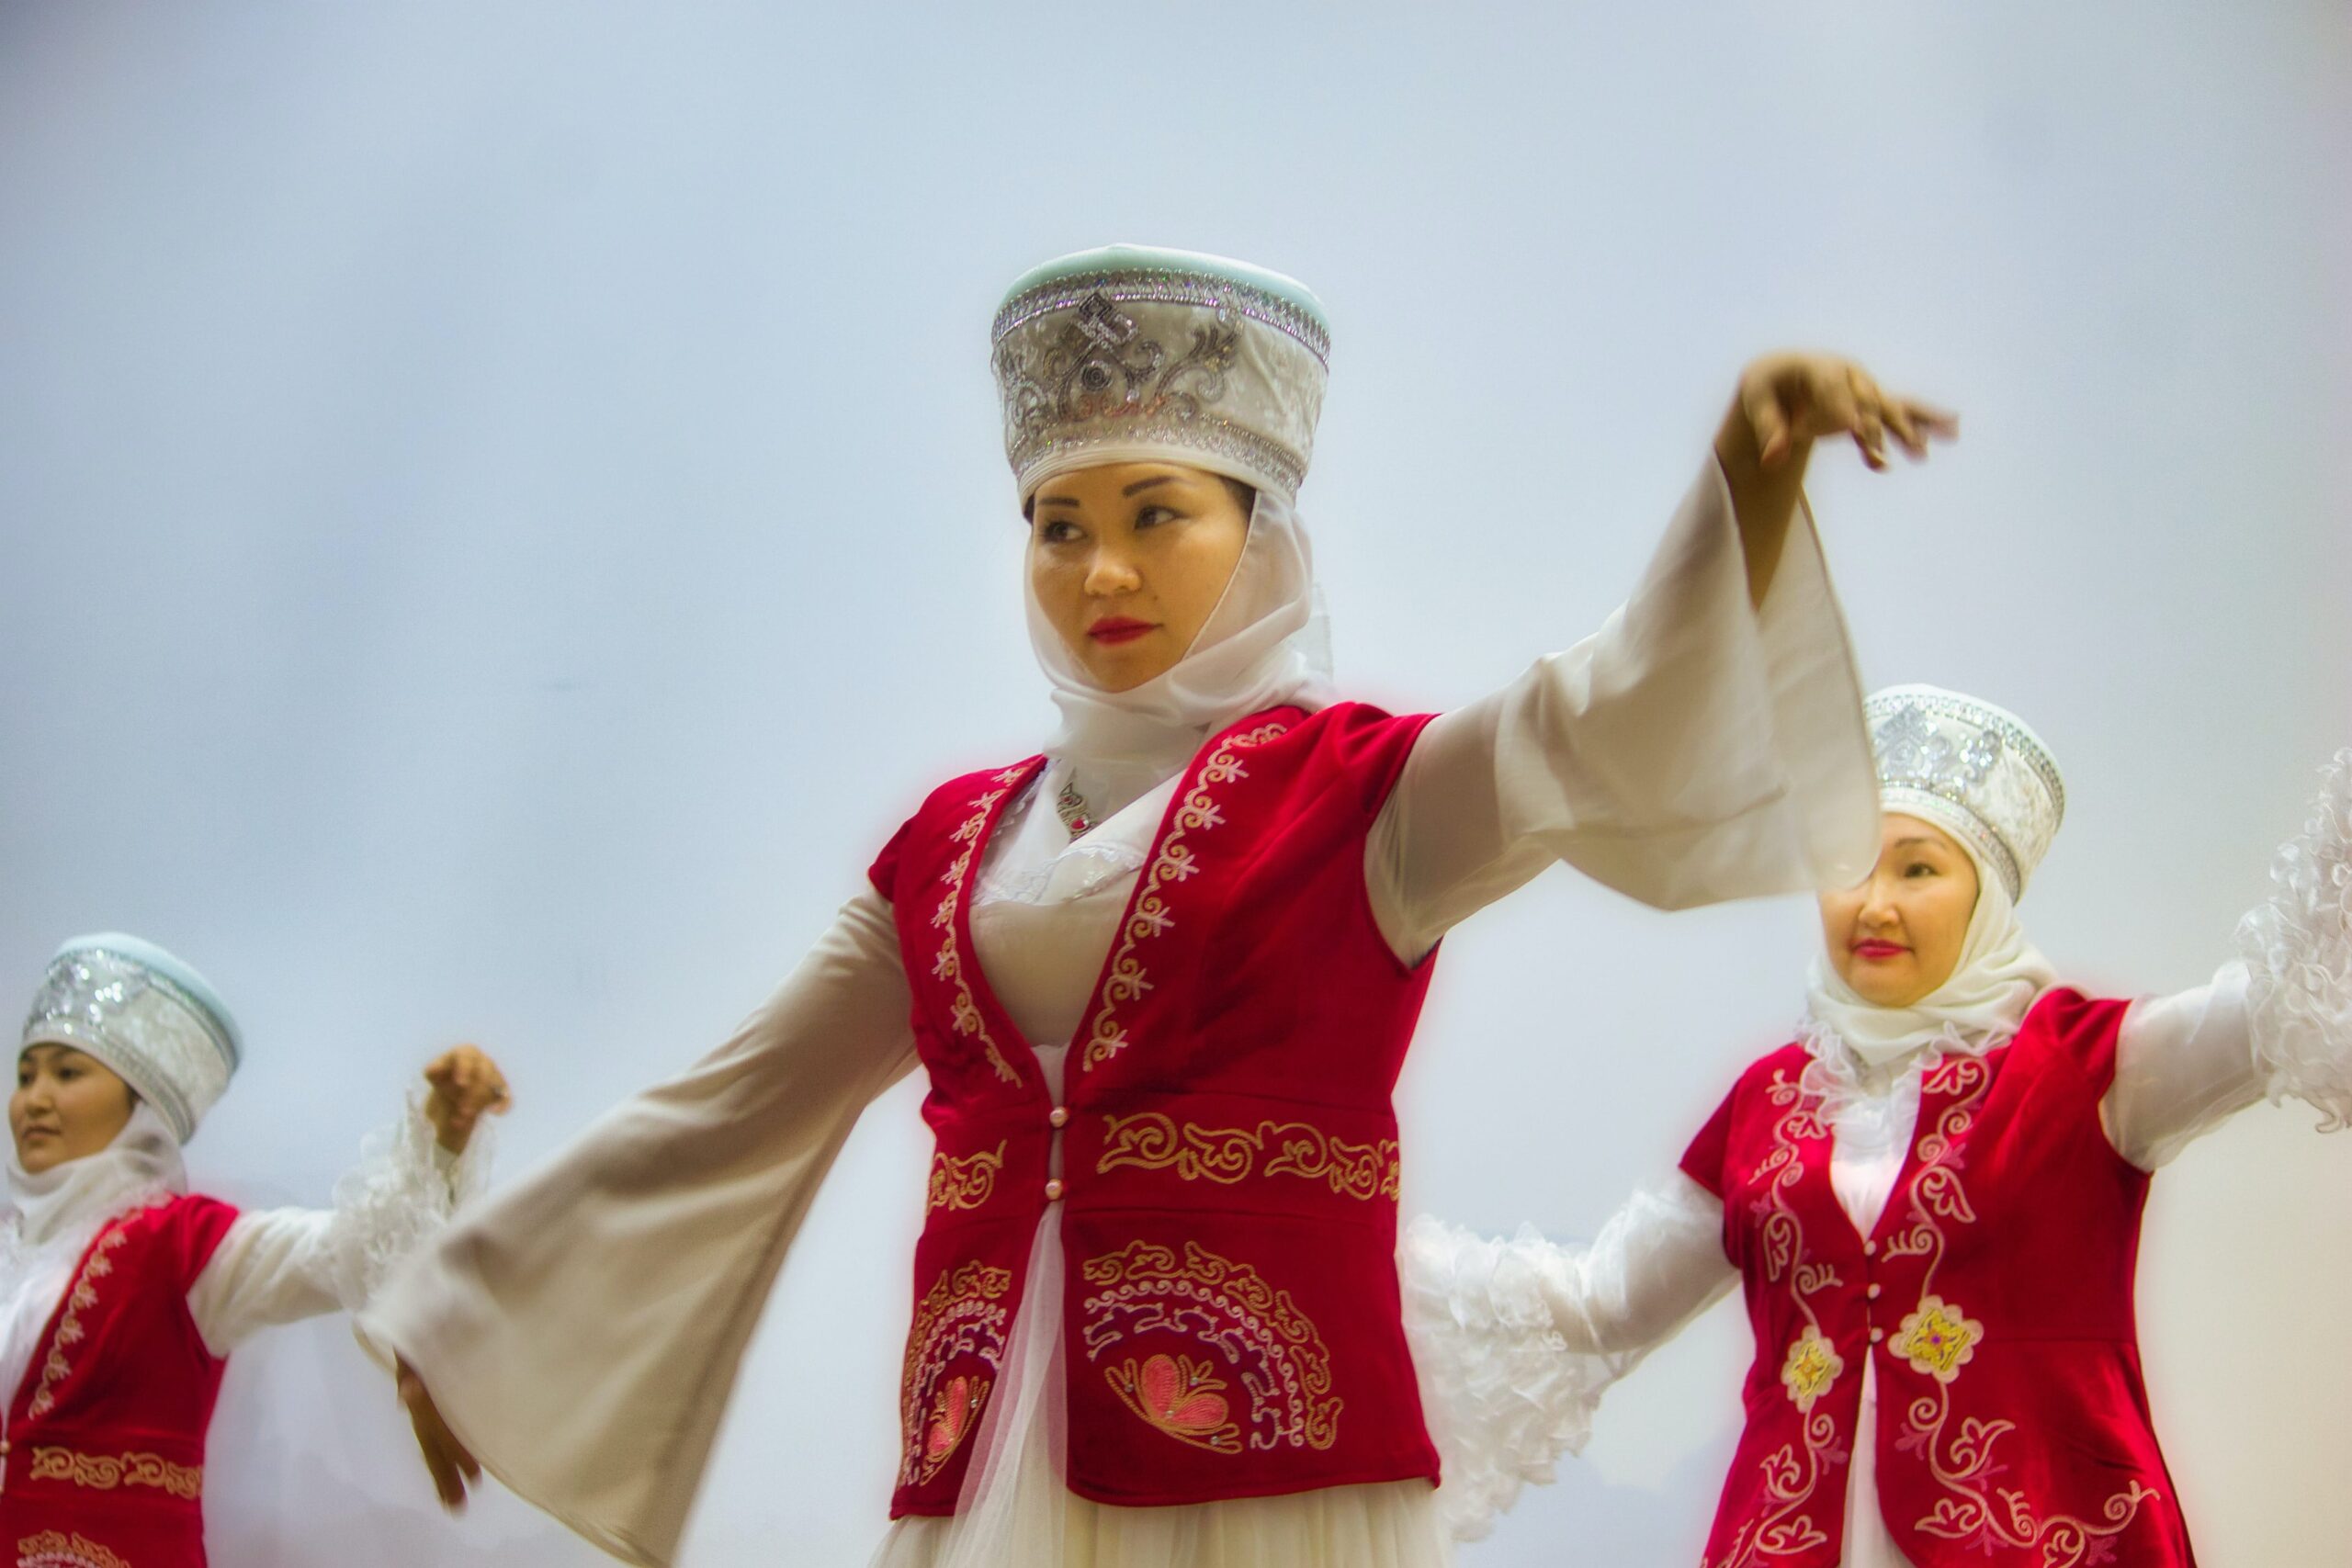 A Kyrgyz woman dressed in traditional garb dances with an ensamble